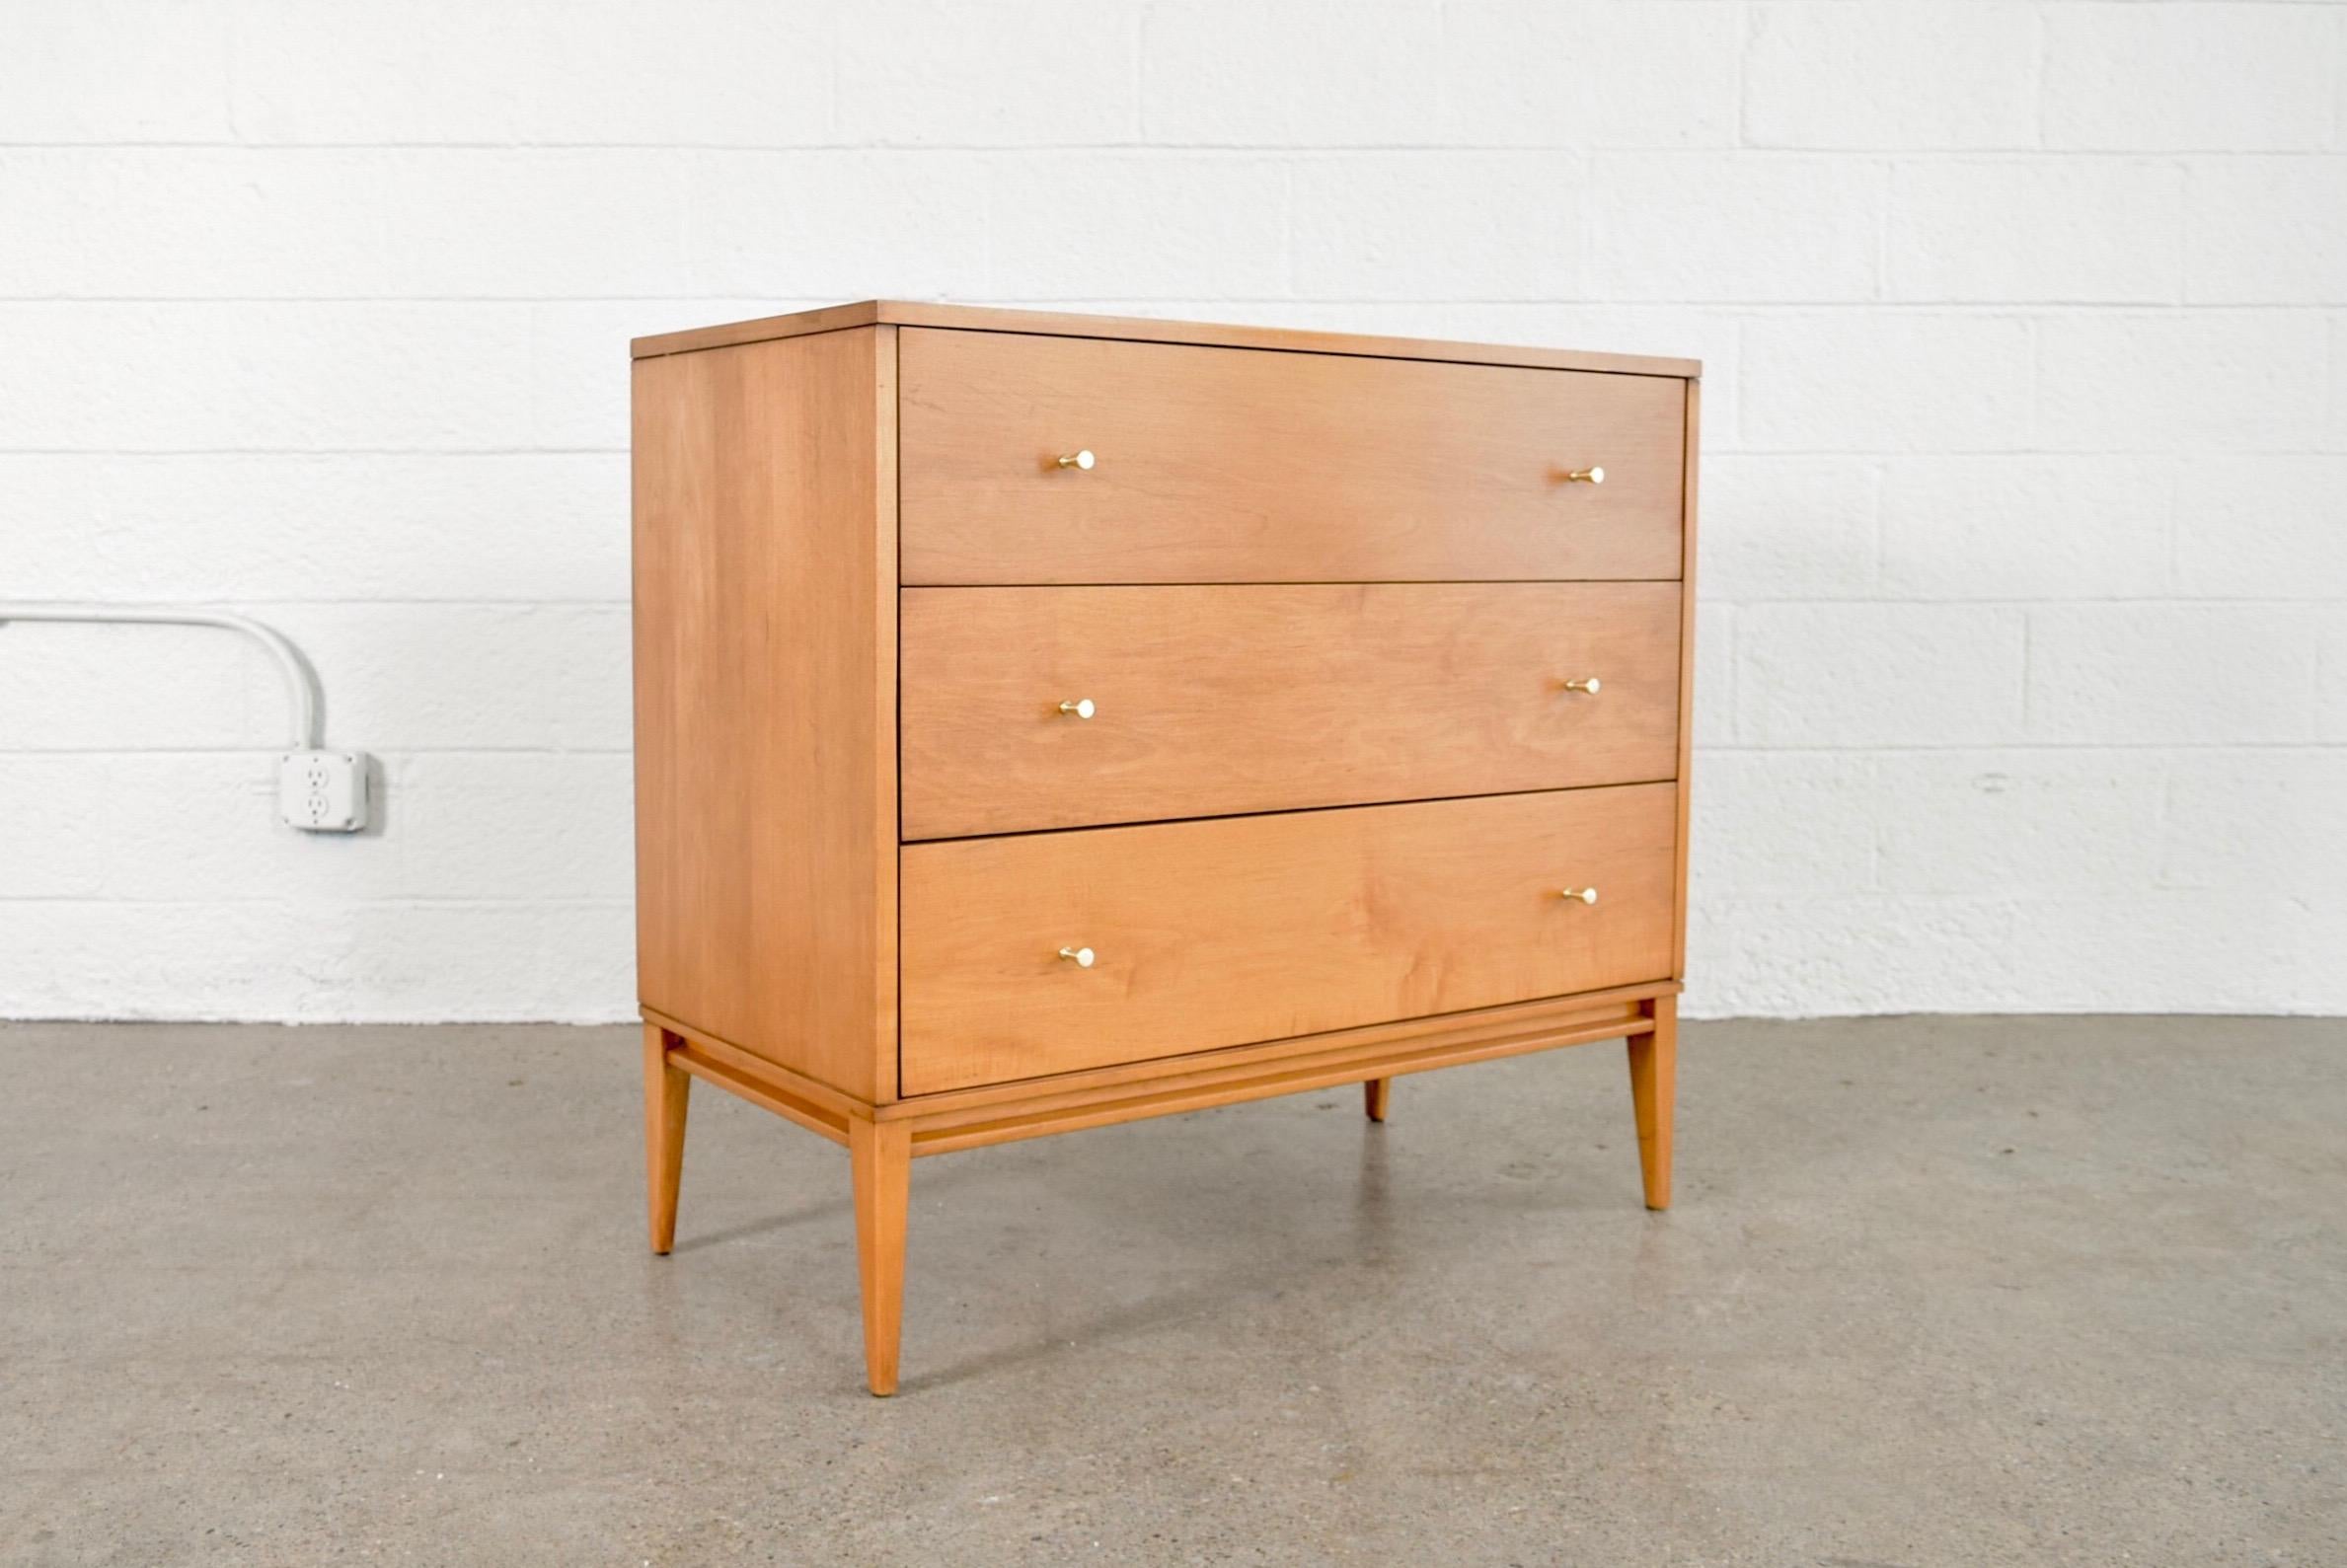 American Midcentury Paul McCobb Planner Group 3-Drawer Chest for Winchendon, 1950s